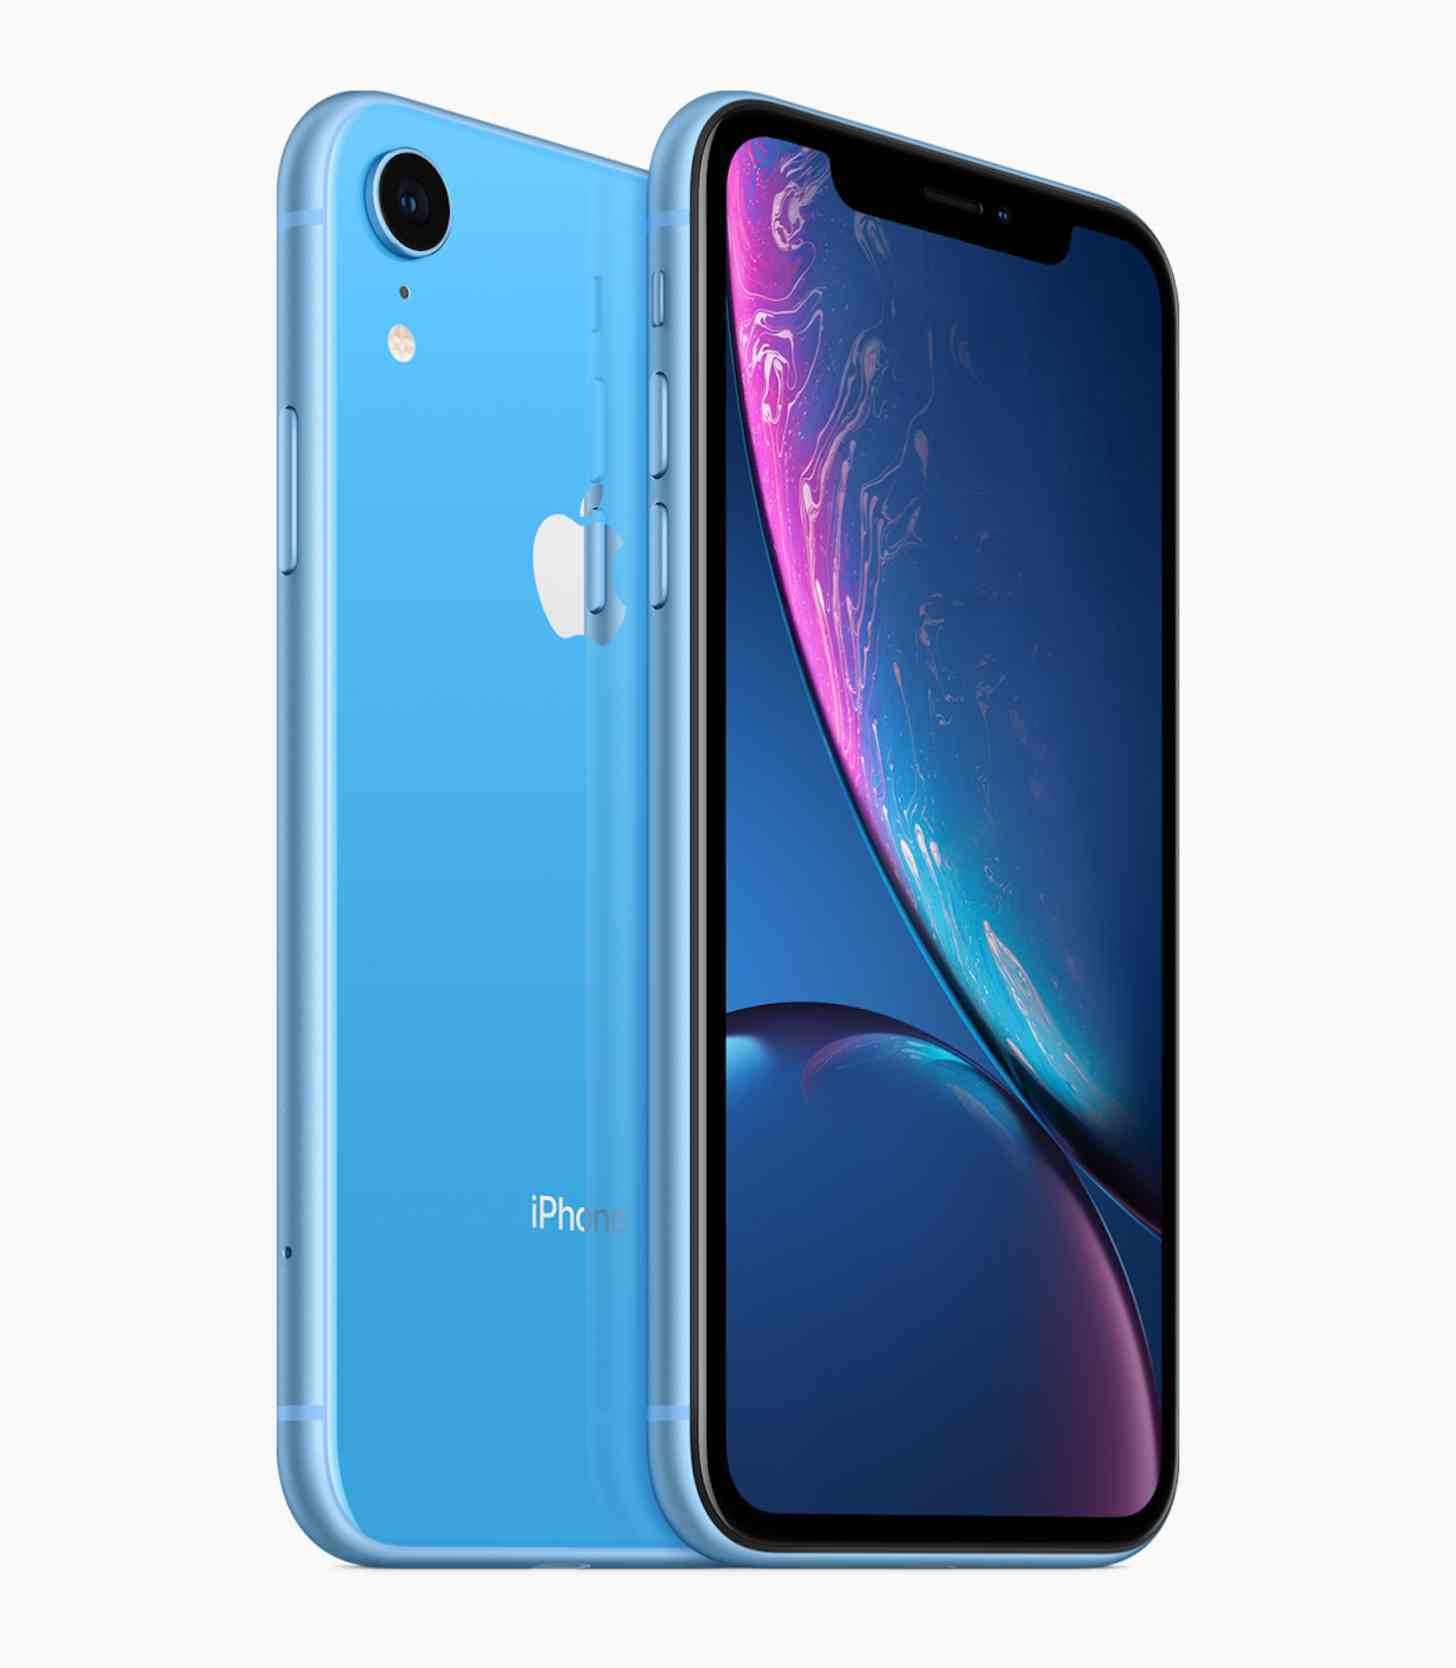 Apple iPhone XR in blue